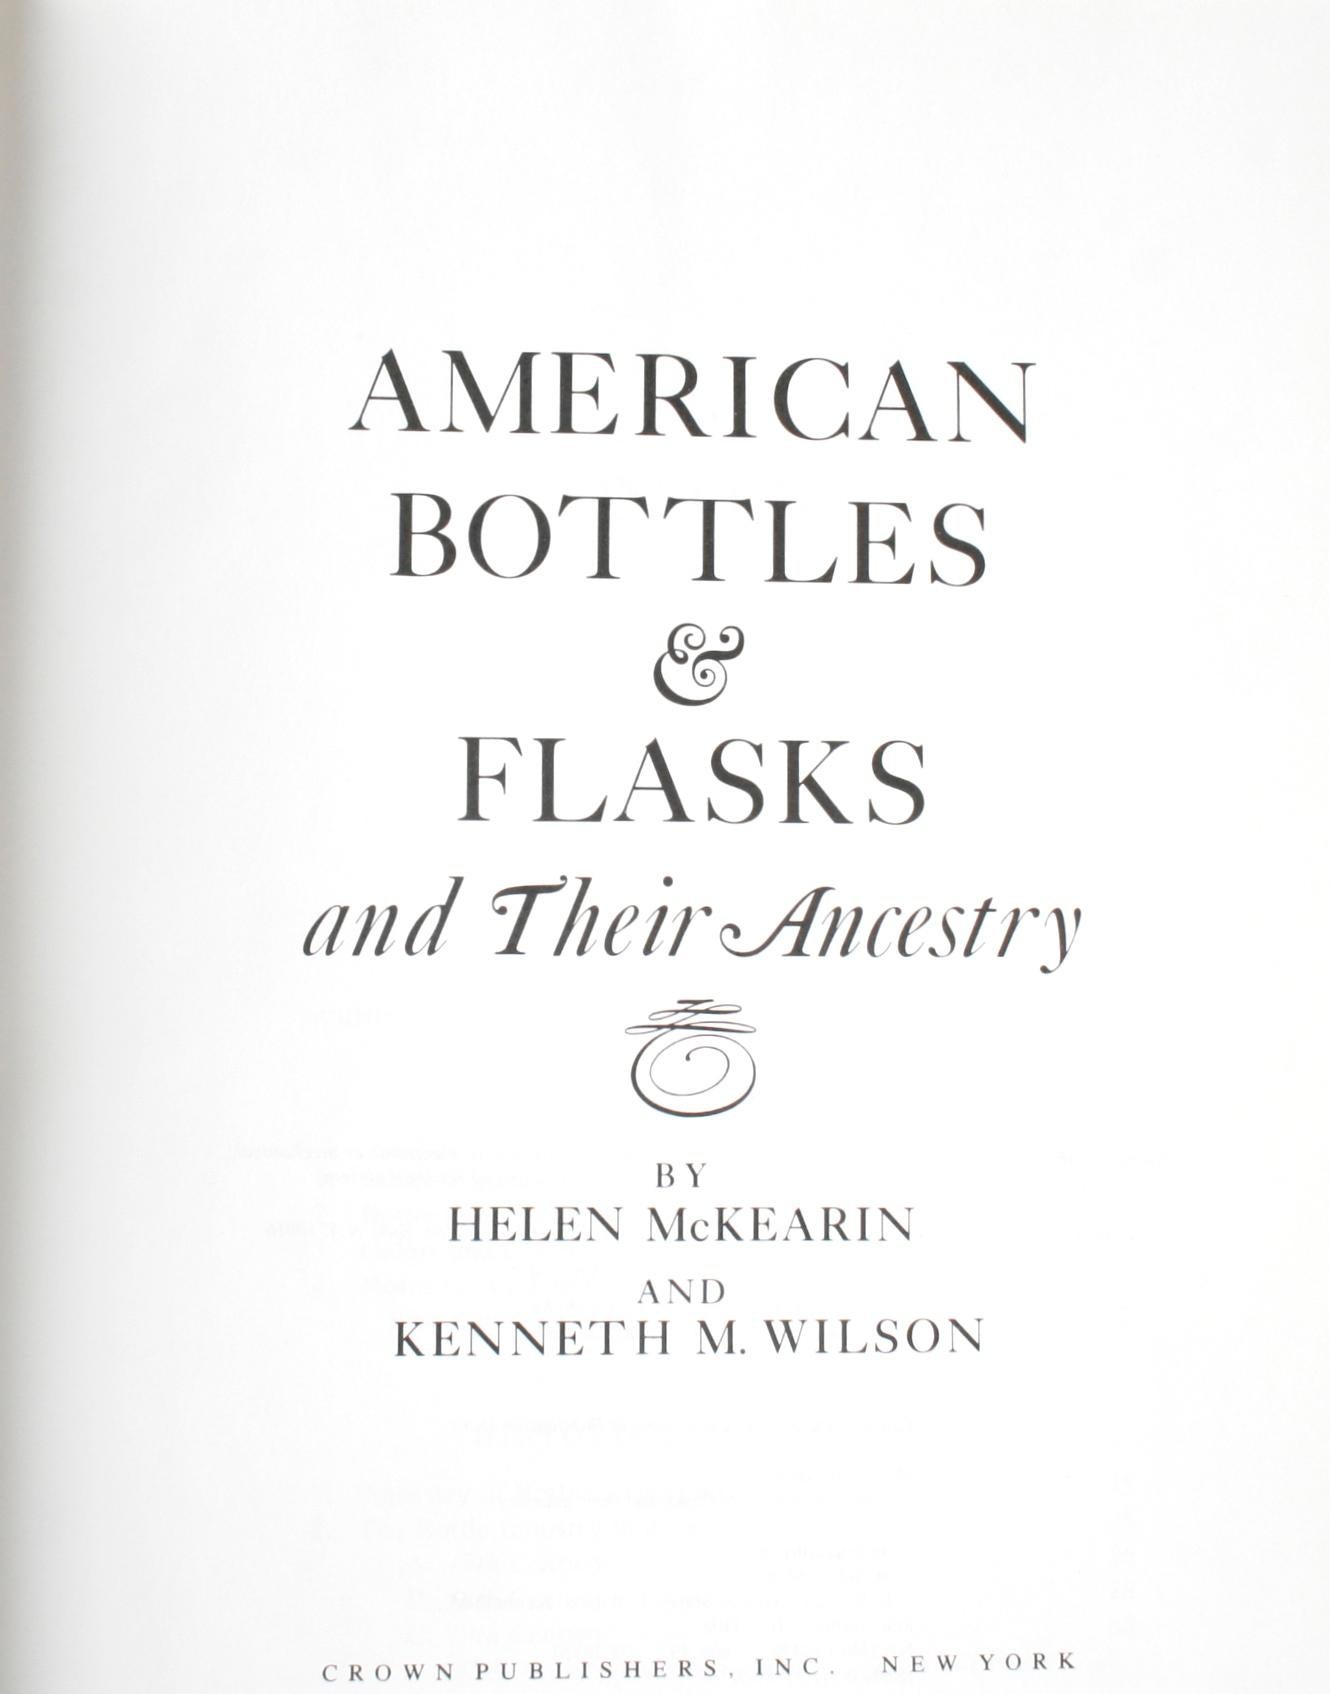 American Bottles & Flasks and Their Ancestry by Helen McKearin and Kenneth M. Wilson. Crown Publishers Inc., New York, 1978. 1st Ed hardcover with dust jacket. Helen McKearin, co-author with her father, George S. McKearin, of the monumental and